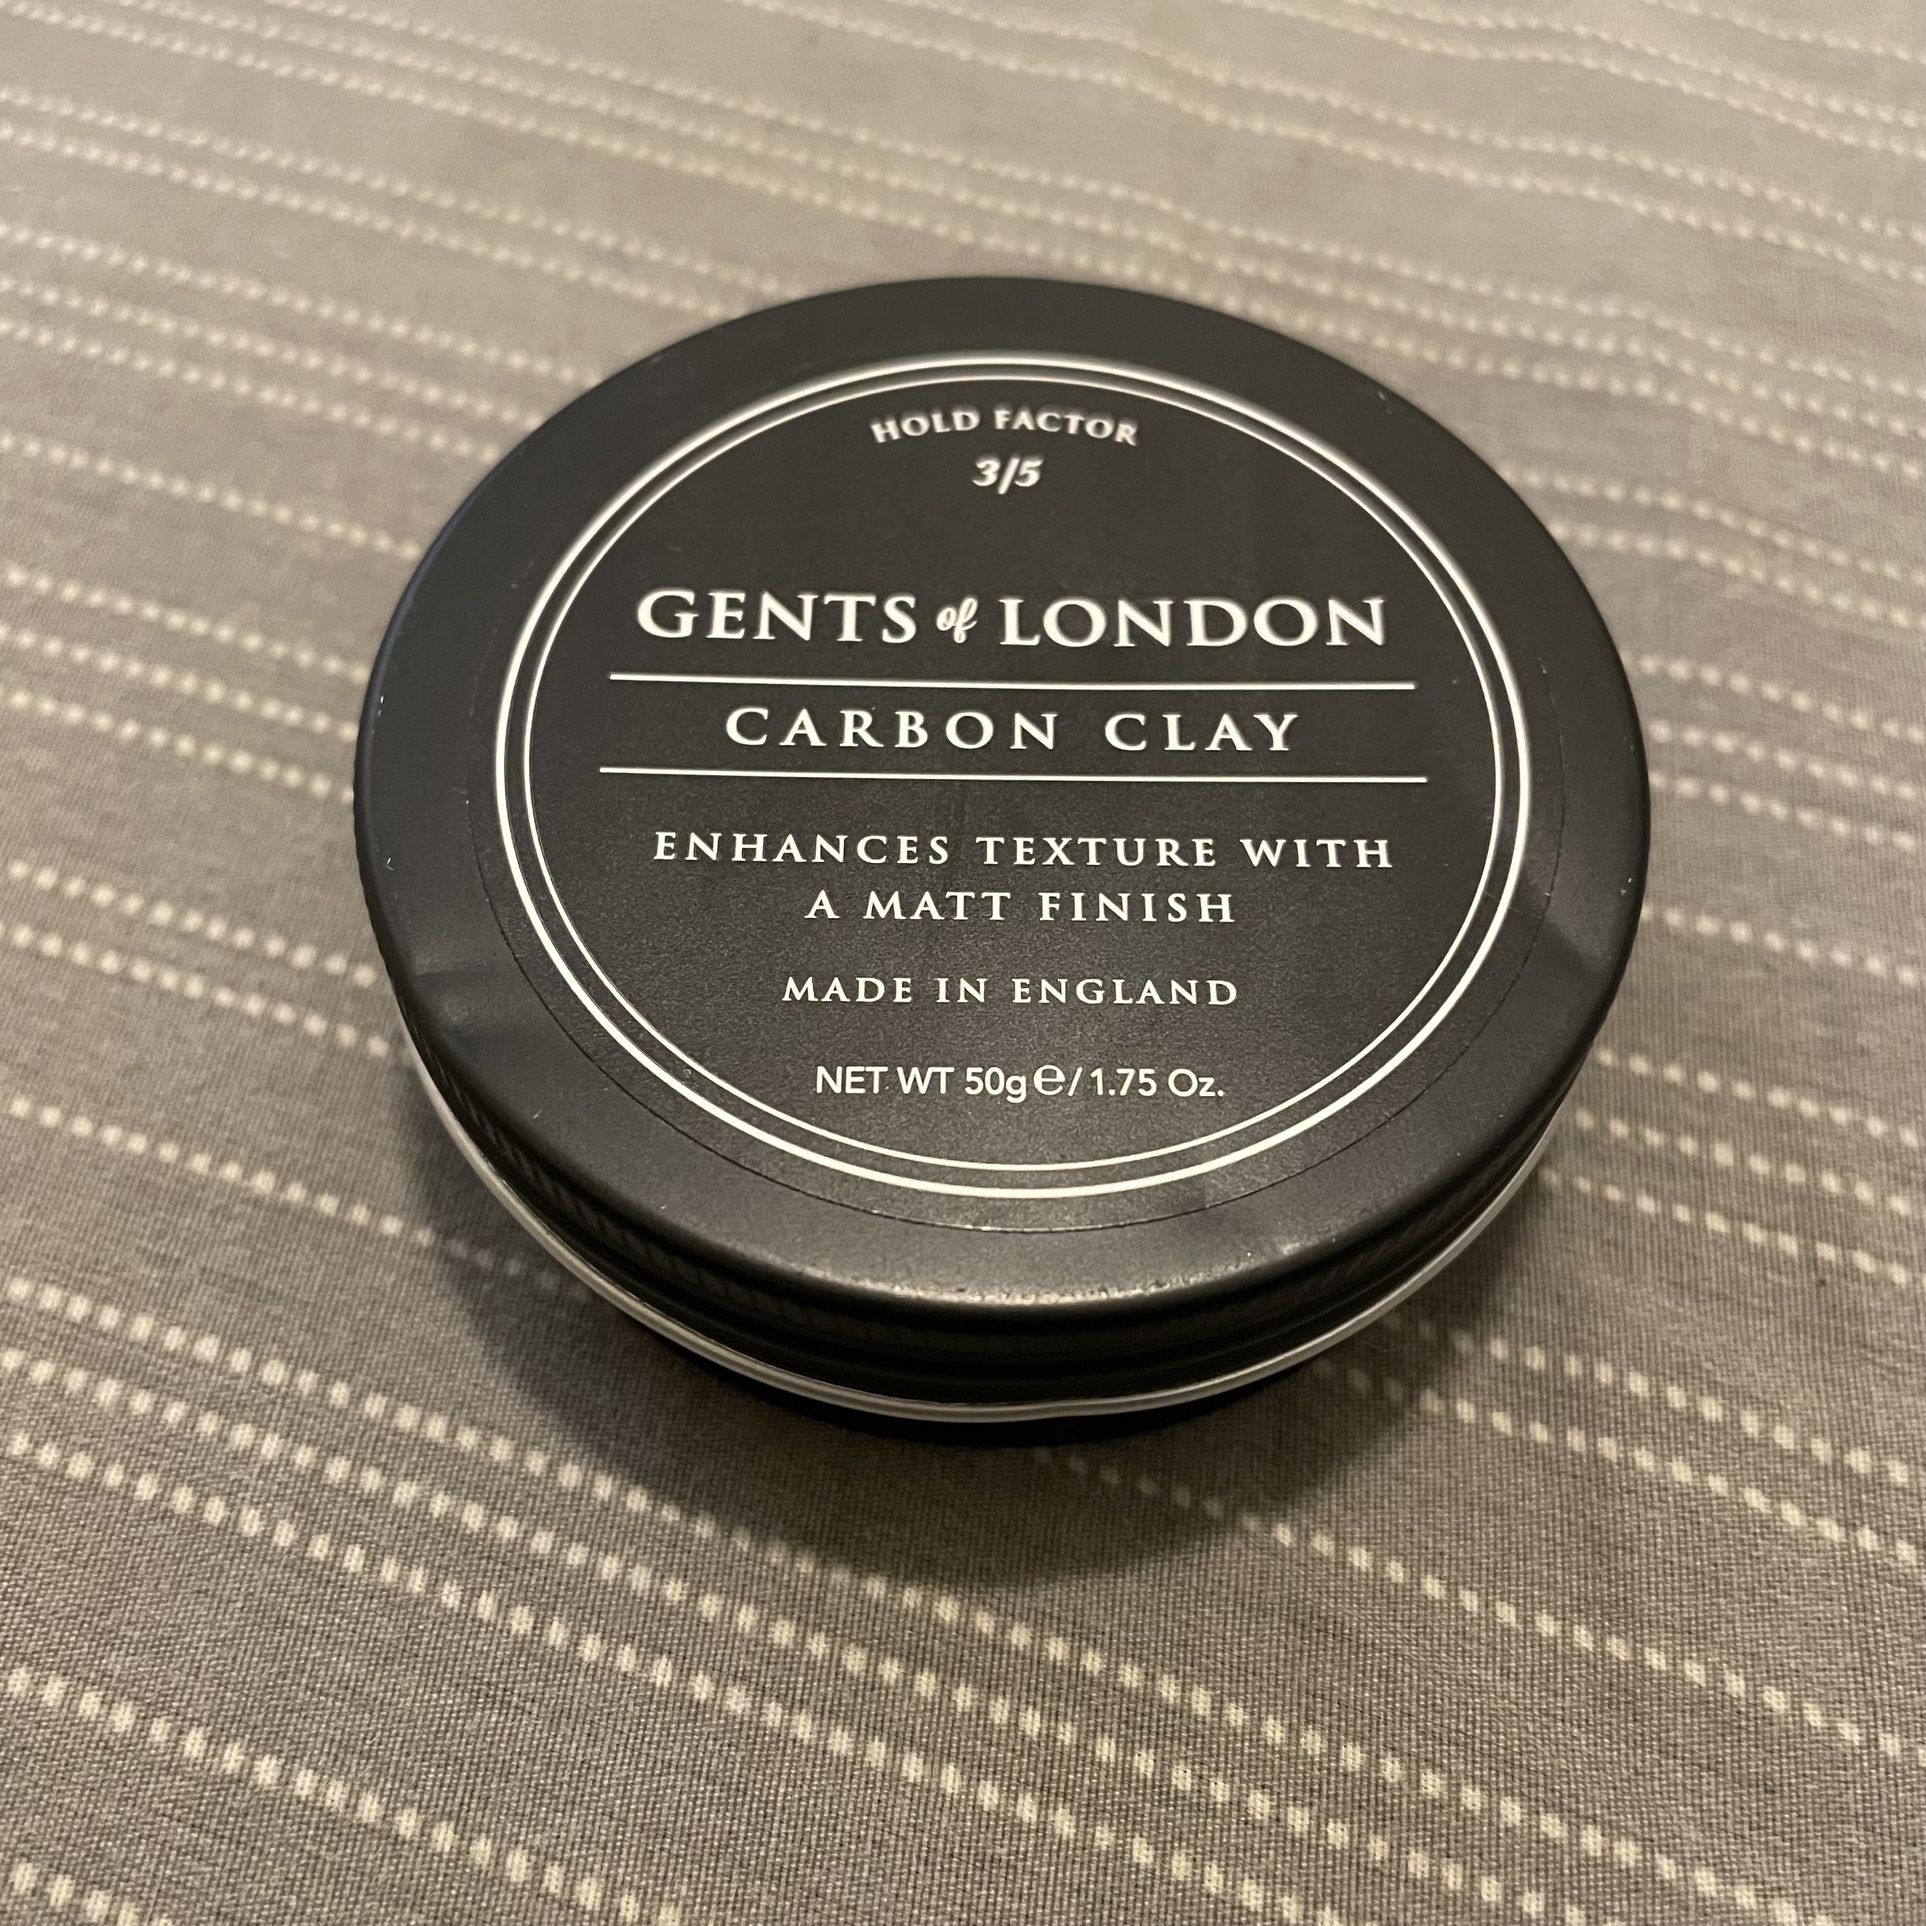 Gents of London Carbon Clay Professional Hair Styling Wax - NEW